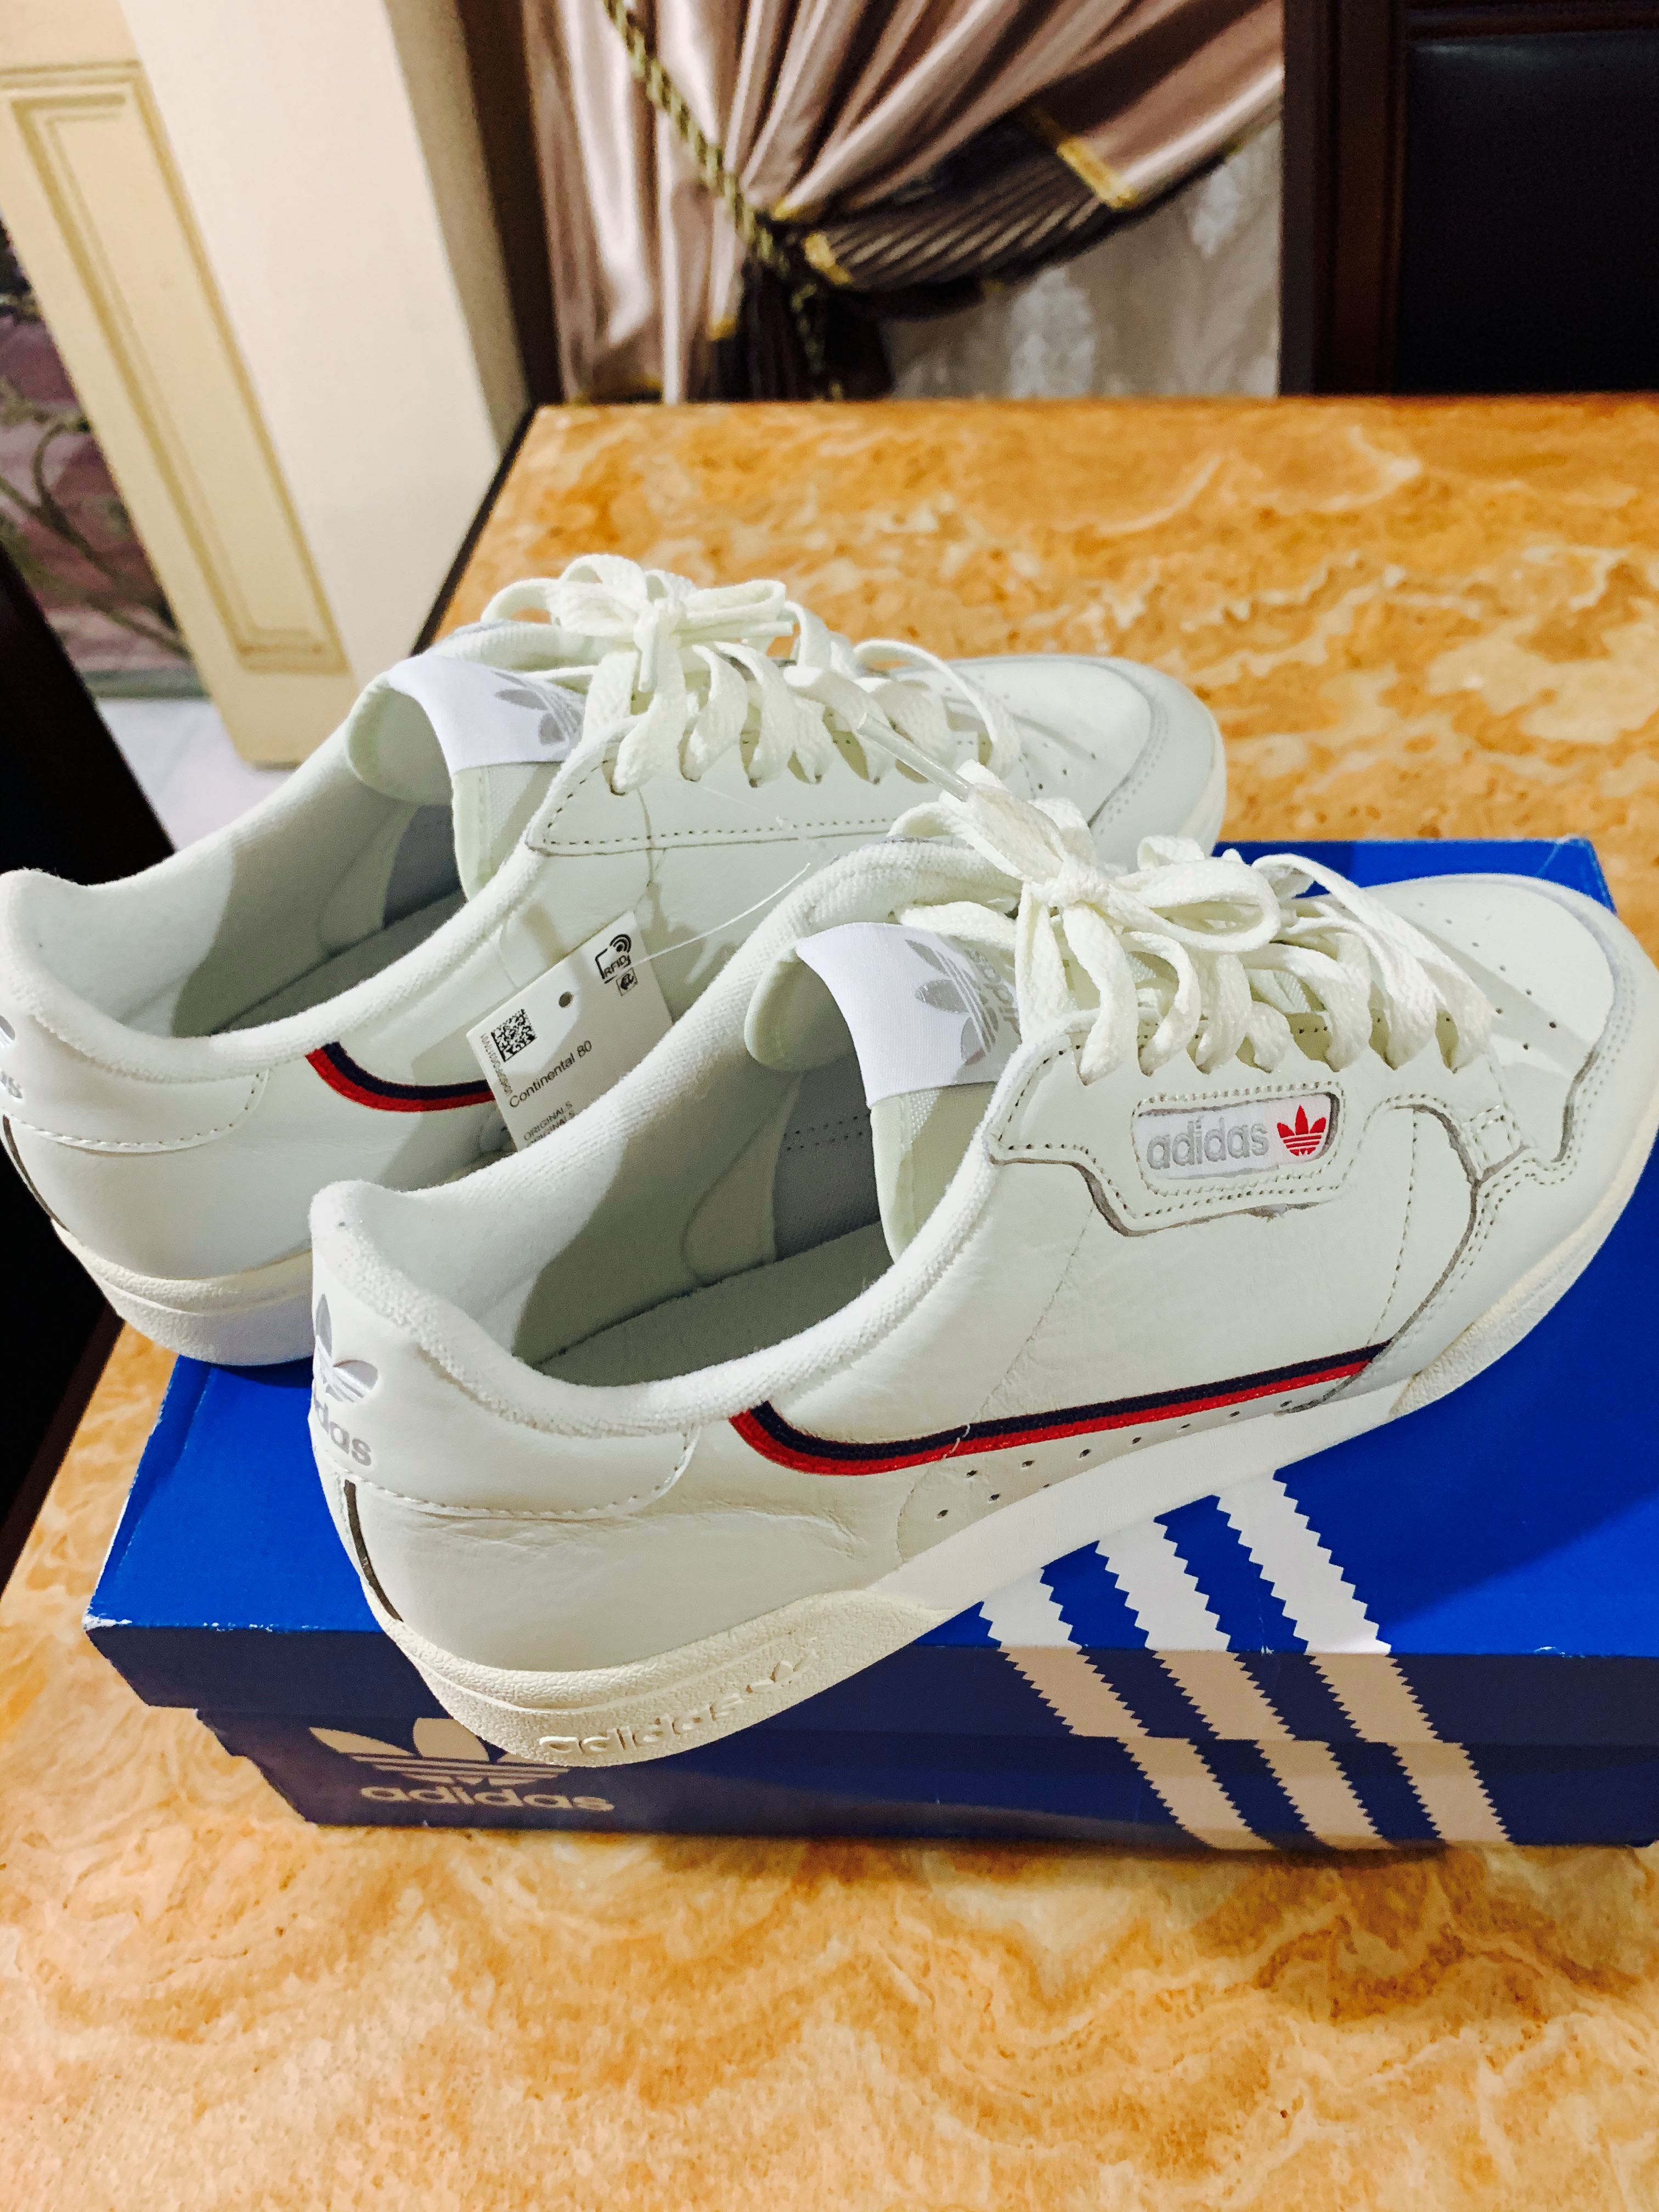 adidas pale blue continental 80 trainers